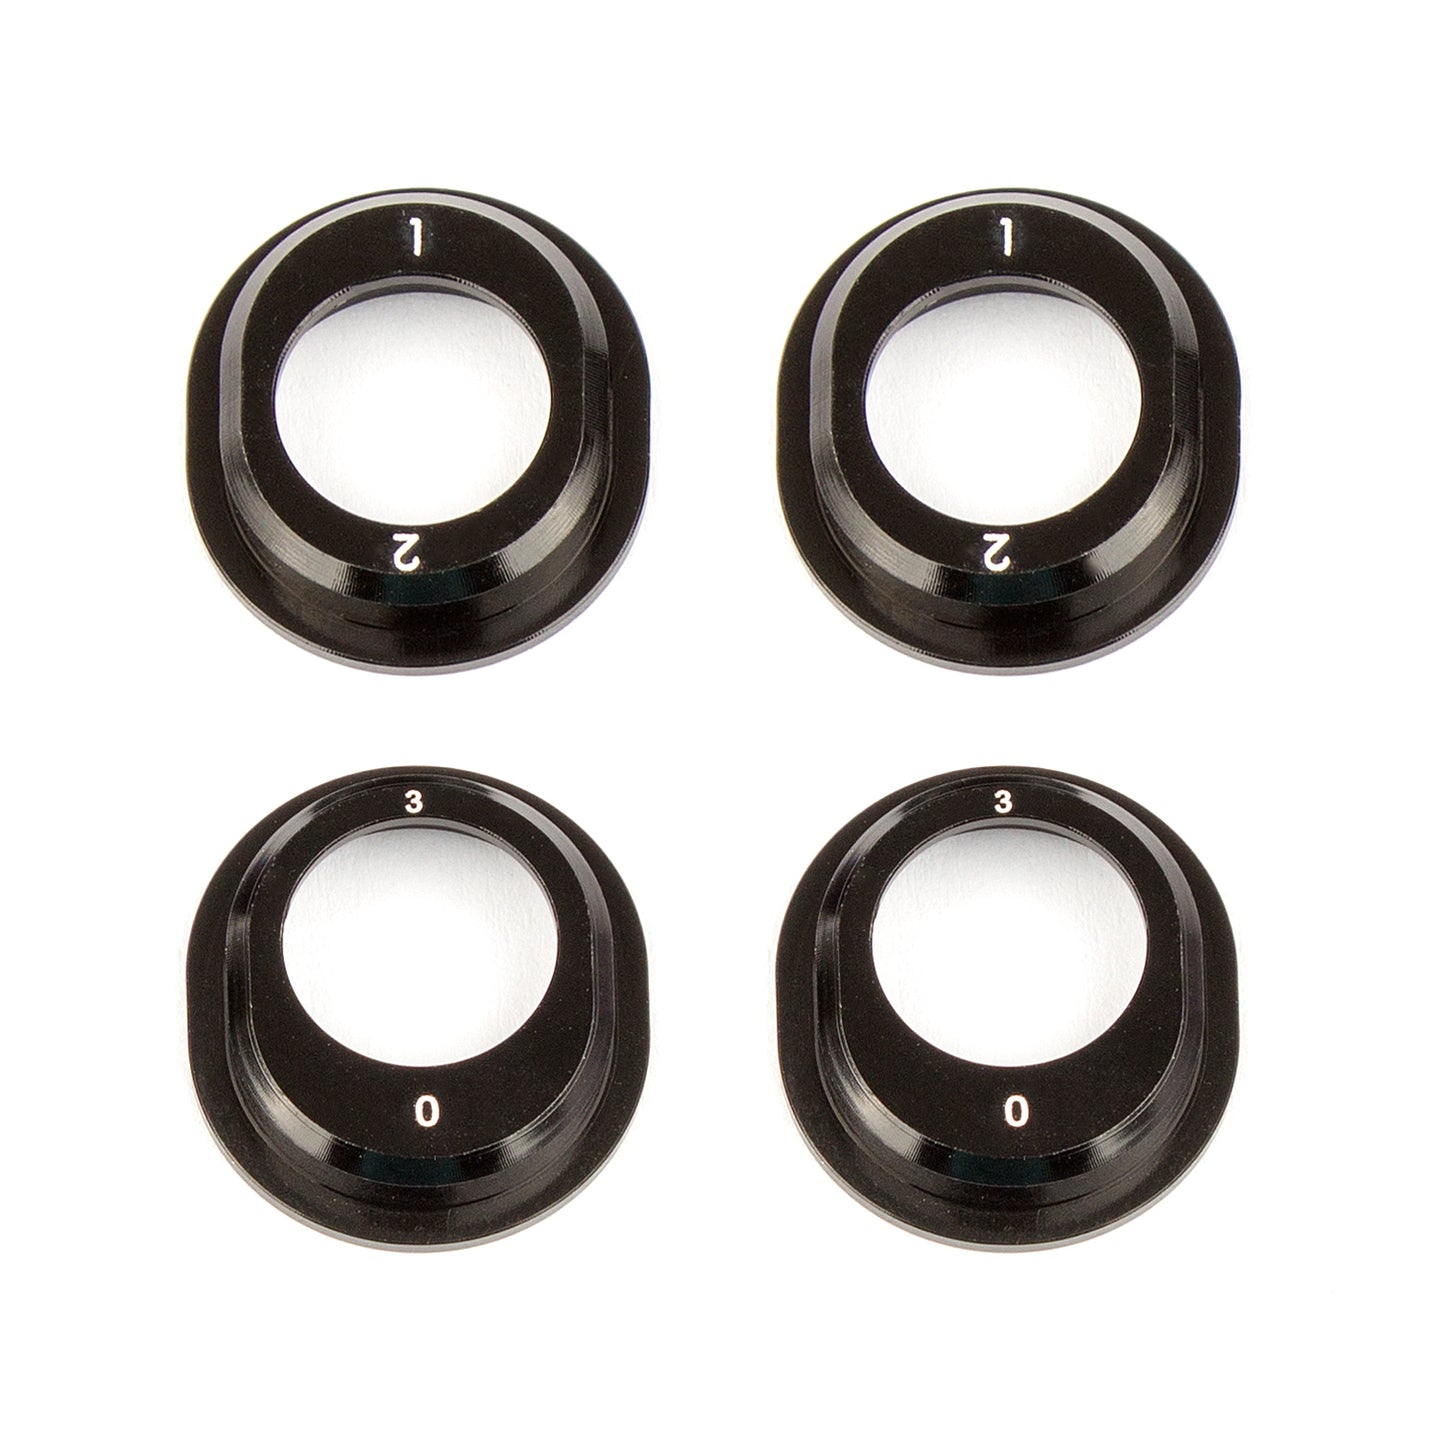 91793 RC10B6.1 ALUMINUM DIFFERENTIAL HEIGHT INSERTS